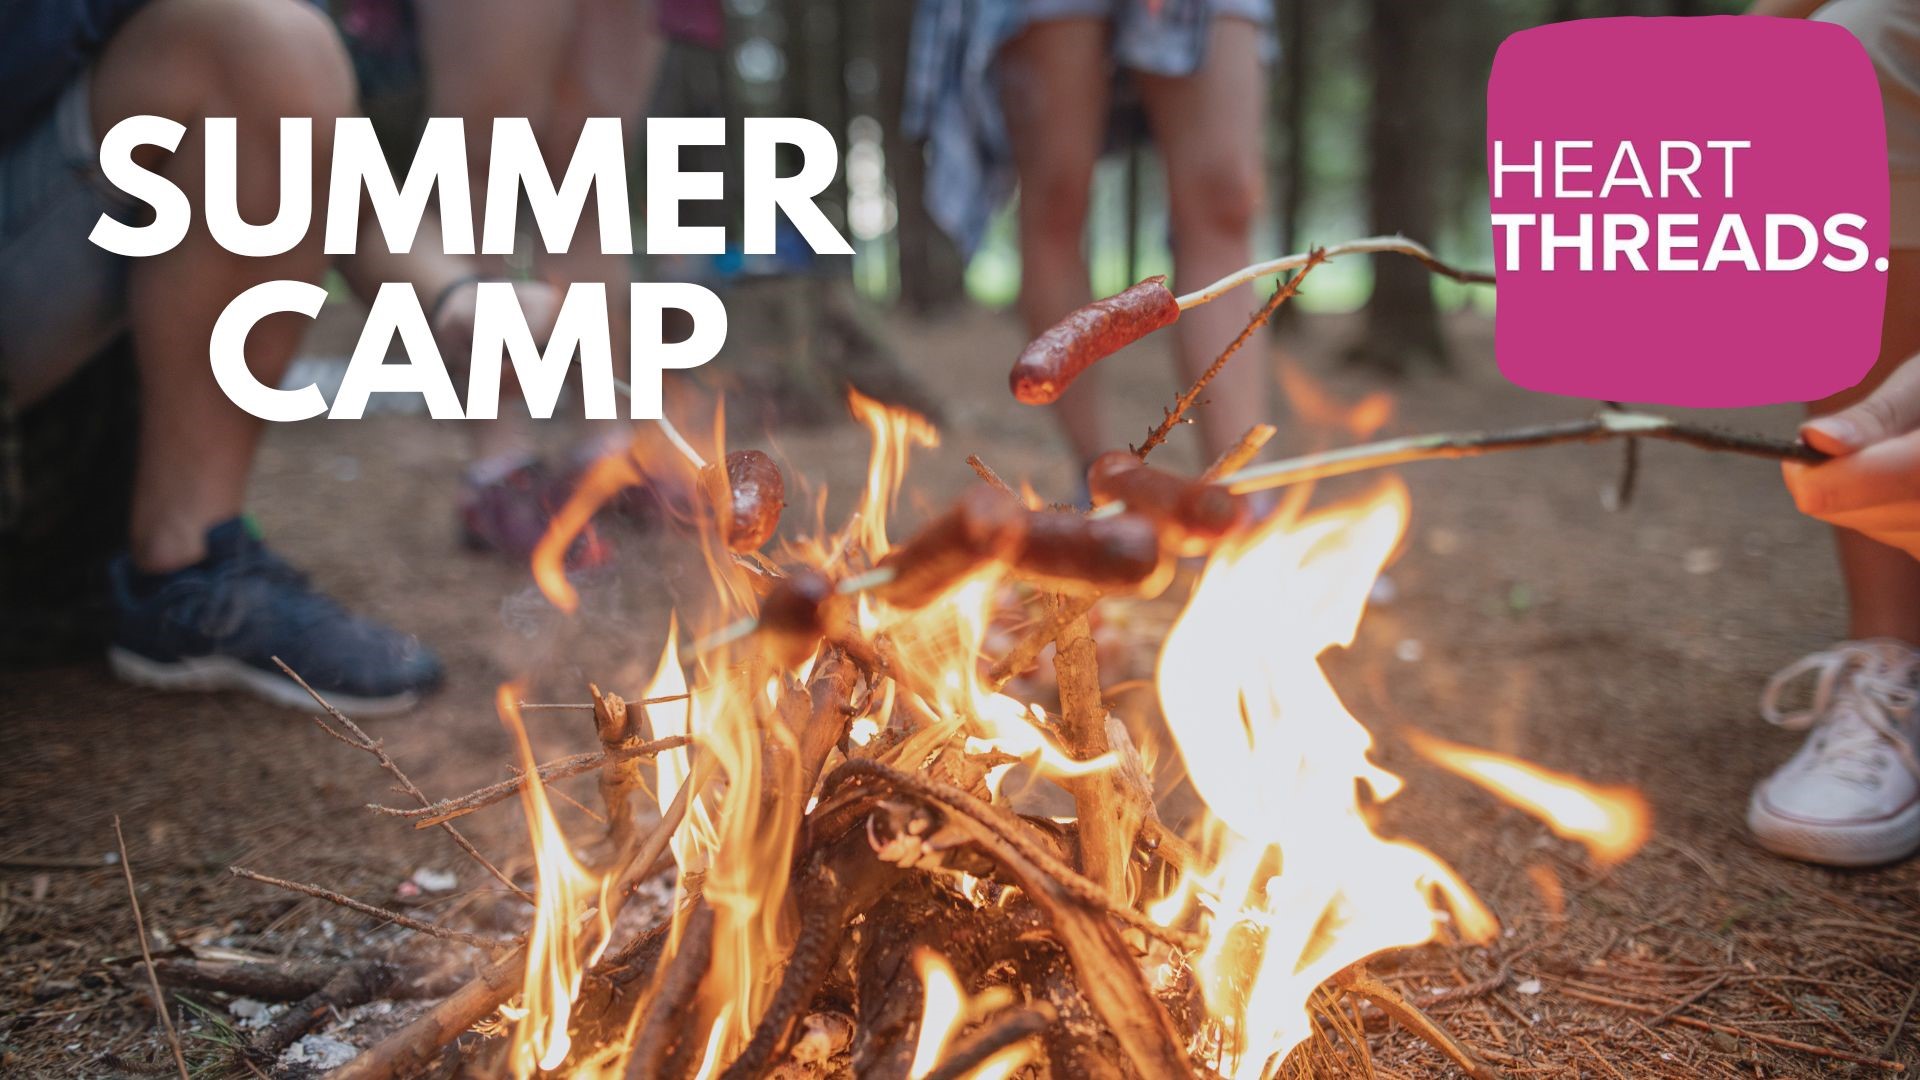 Heartwarming stories of summer camps striving to teach, encourage and inspire kids, teens and even adults, to be their best and reach for new heights.